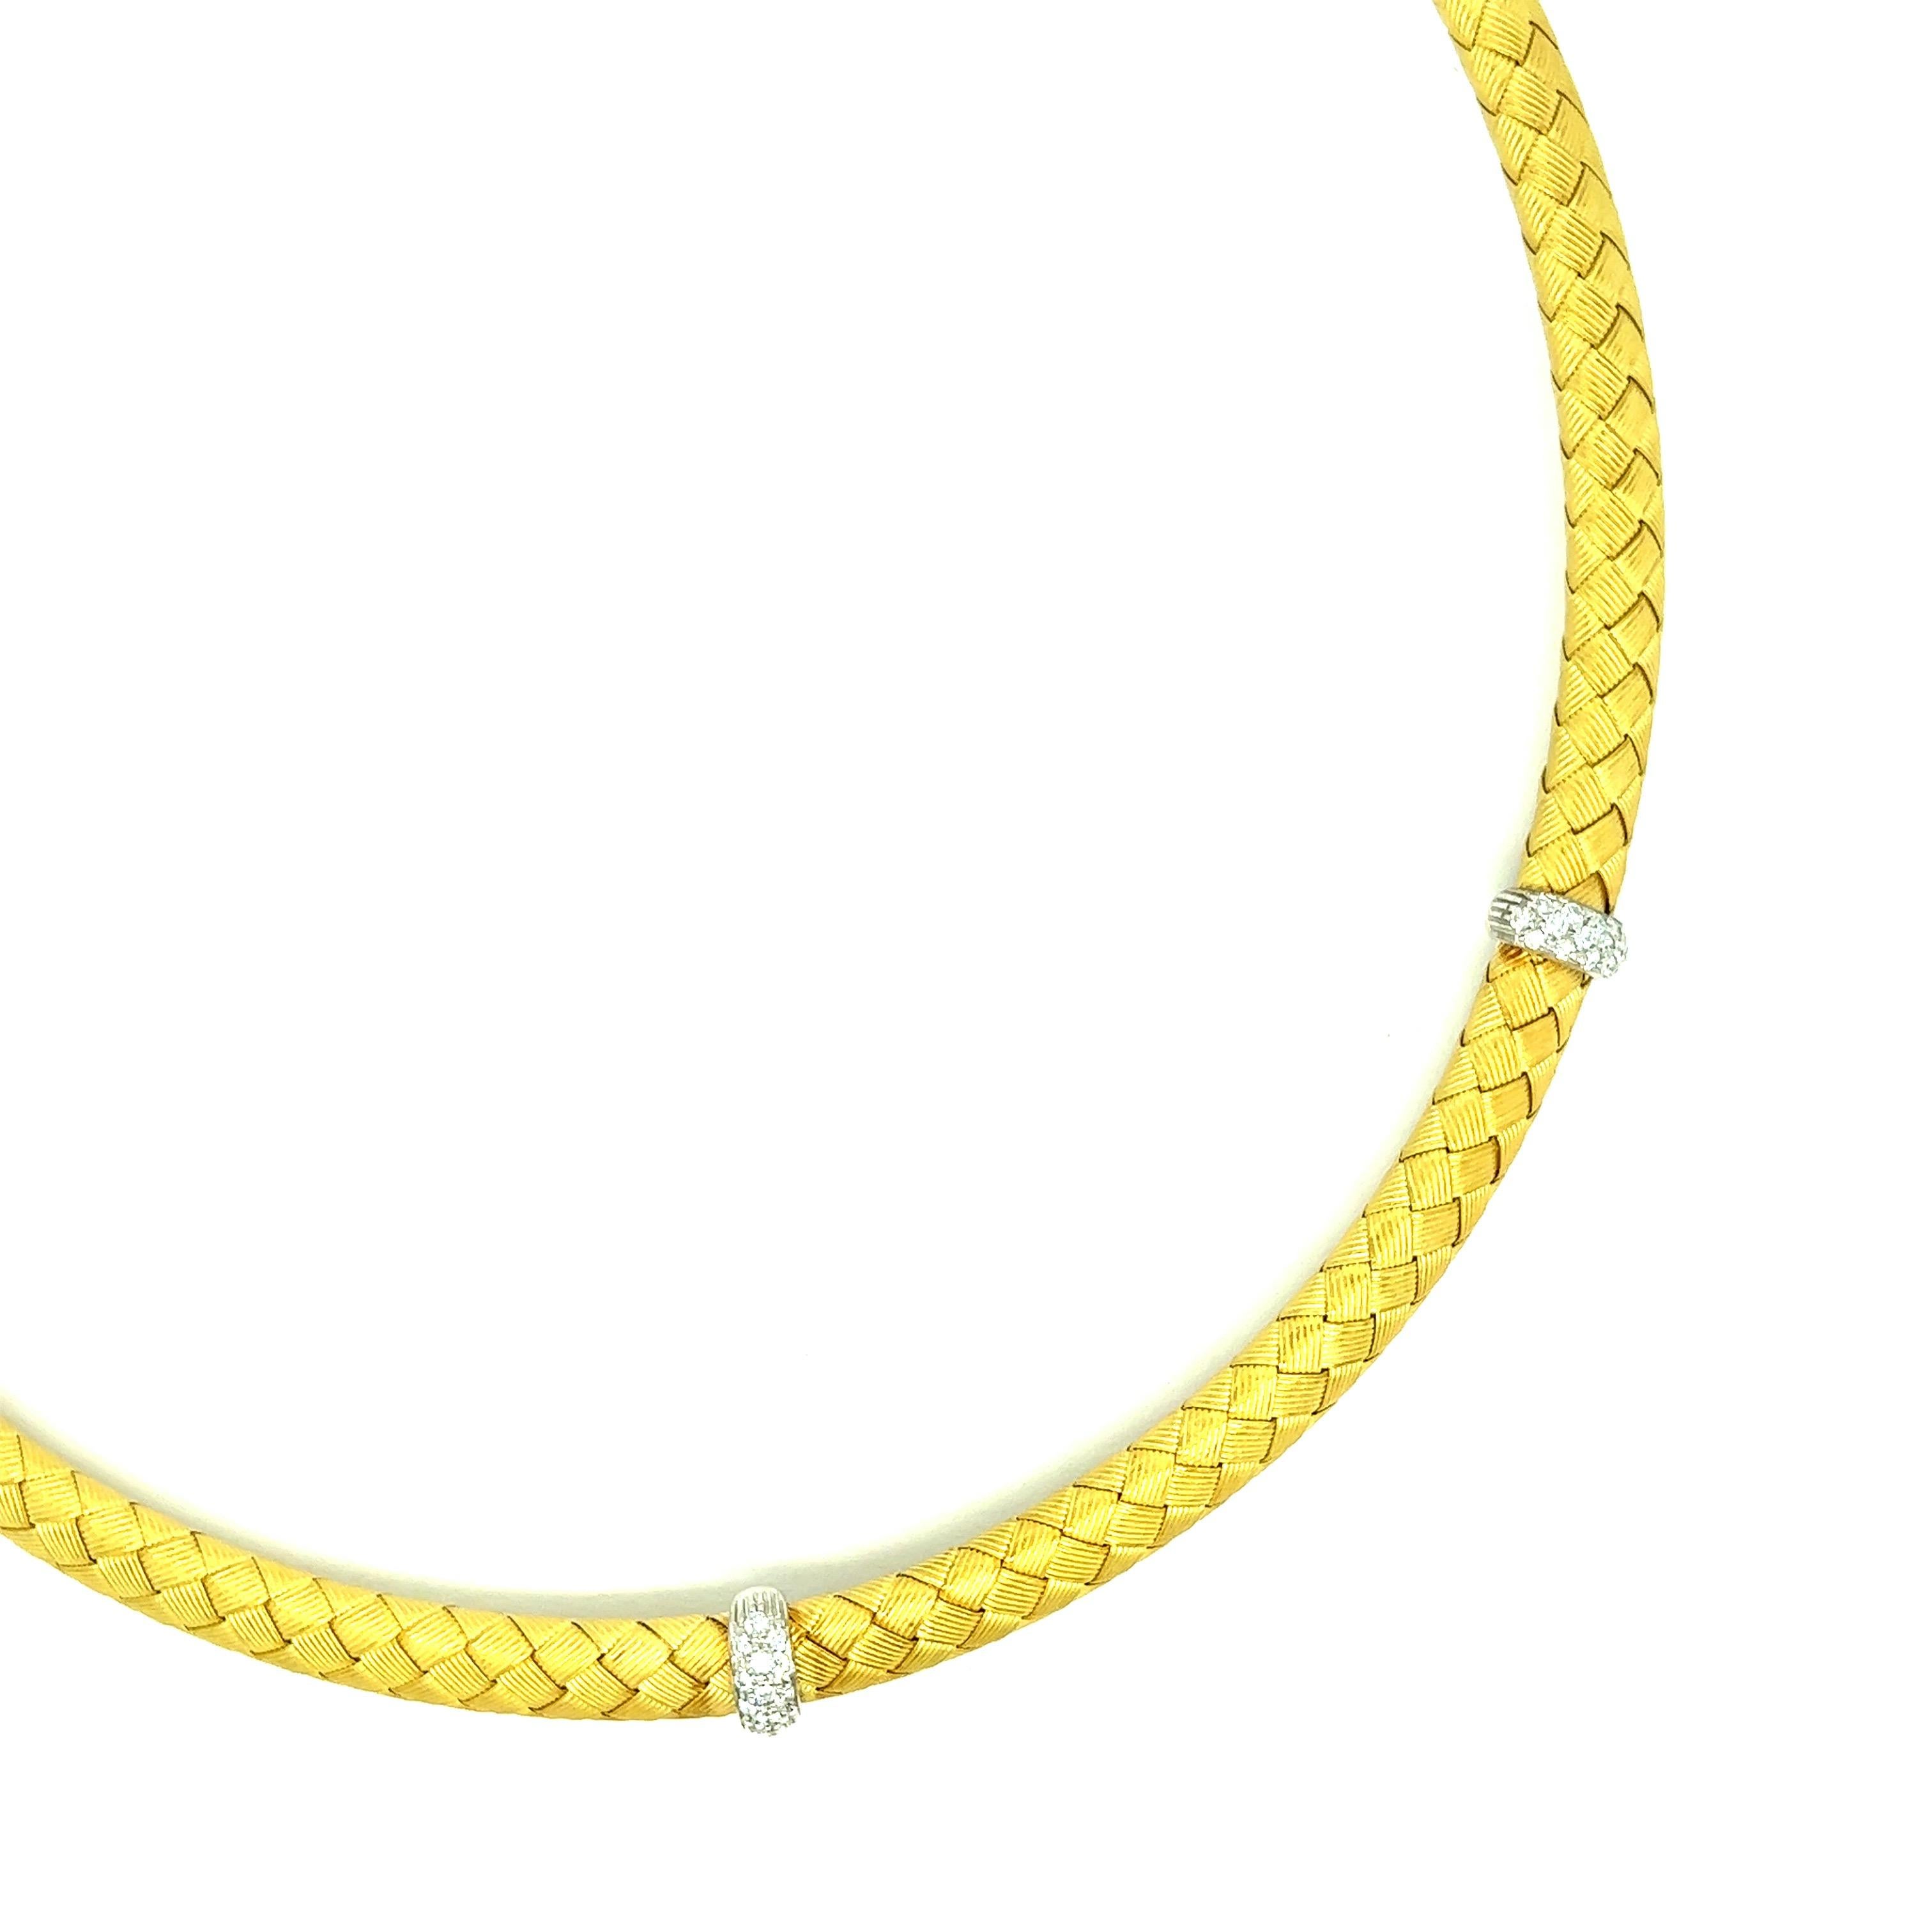 Roberto Coin 18k weave collar necklace, made in Italy

Basket weave design, 18 karat yellow gold; marked 18k Italy

Size: width 0.31 inch, inner circumference 15.75 inches
Total weight: 40.9 grams